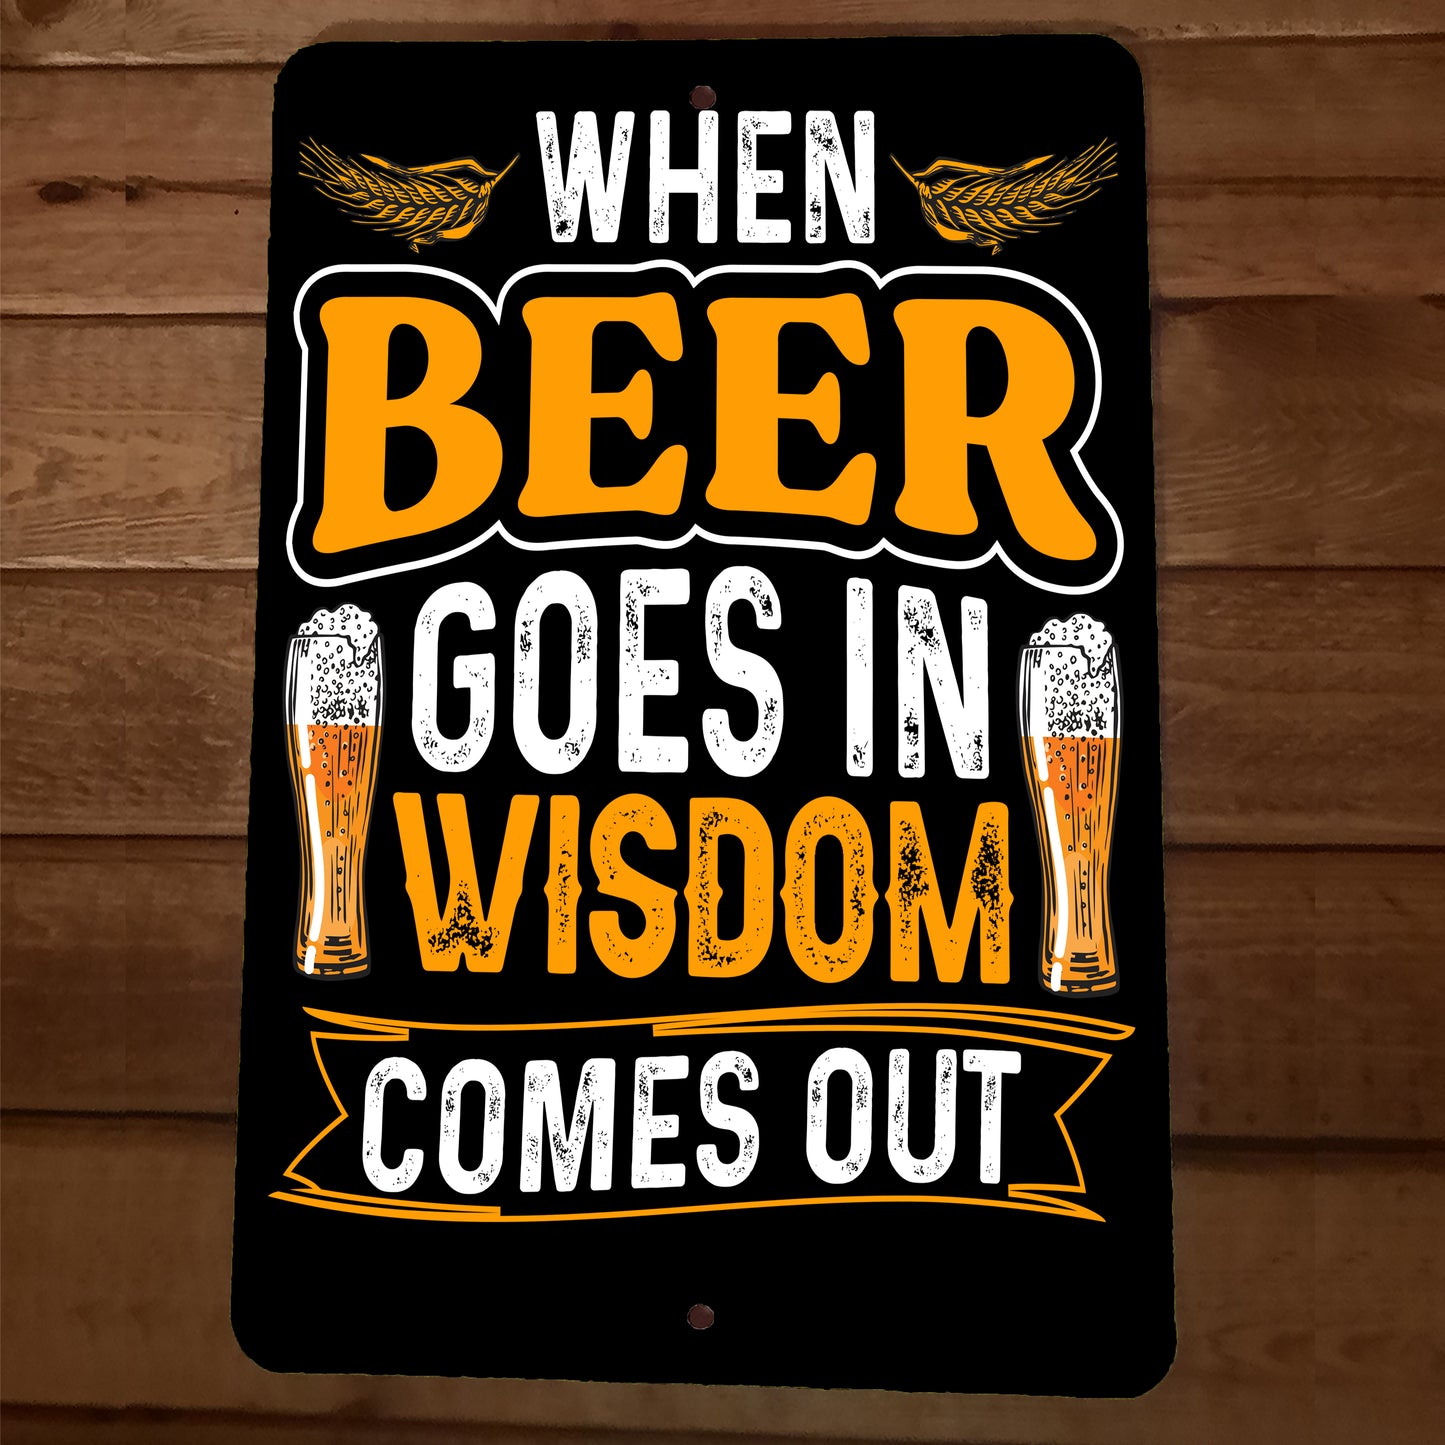 Bundle of Beers 5 Humorous 8x12 Metal Wall Bar Signs and Mouse Pad #3